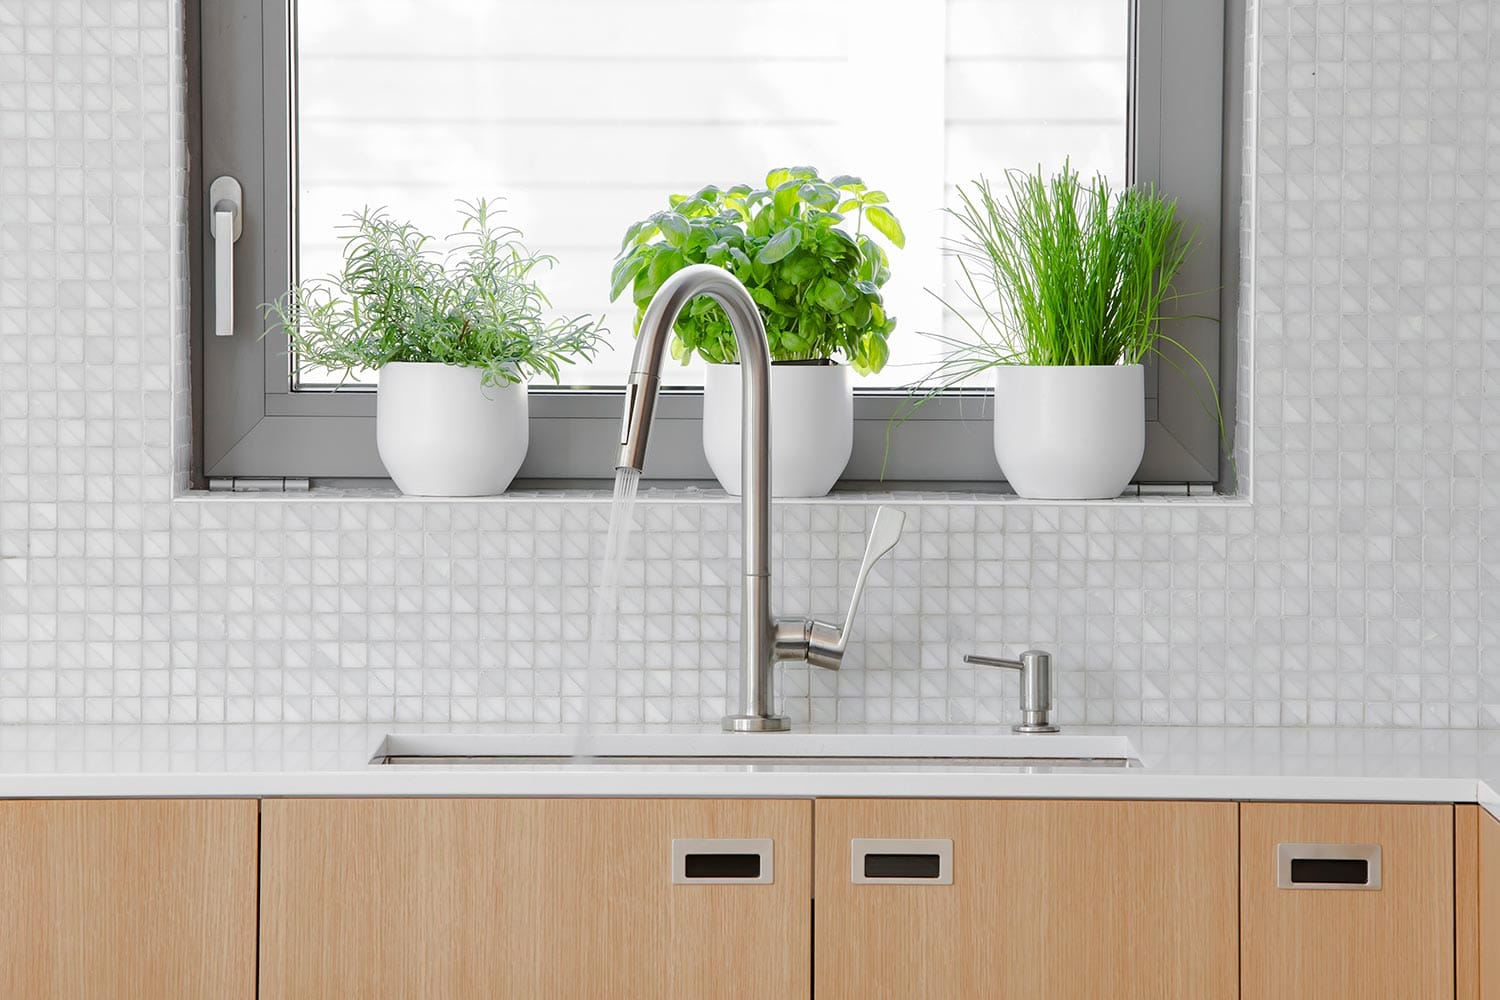 Modern kitchen stainless steal faucet with water running into sink